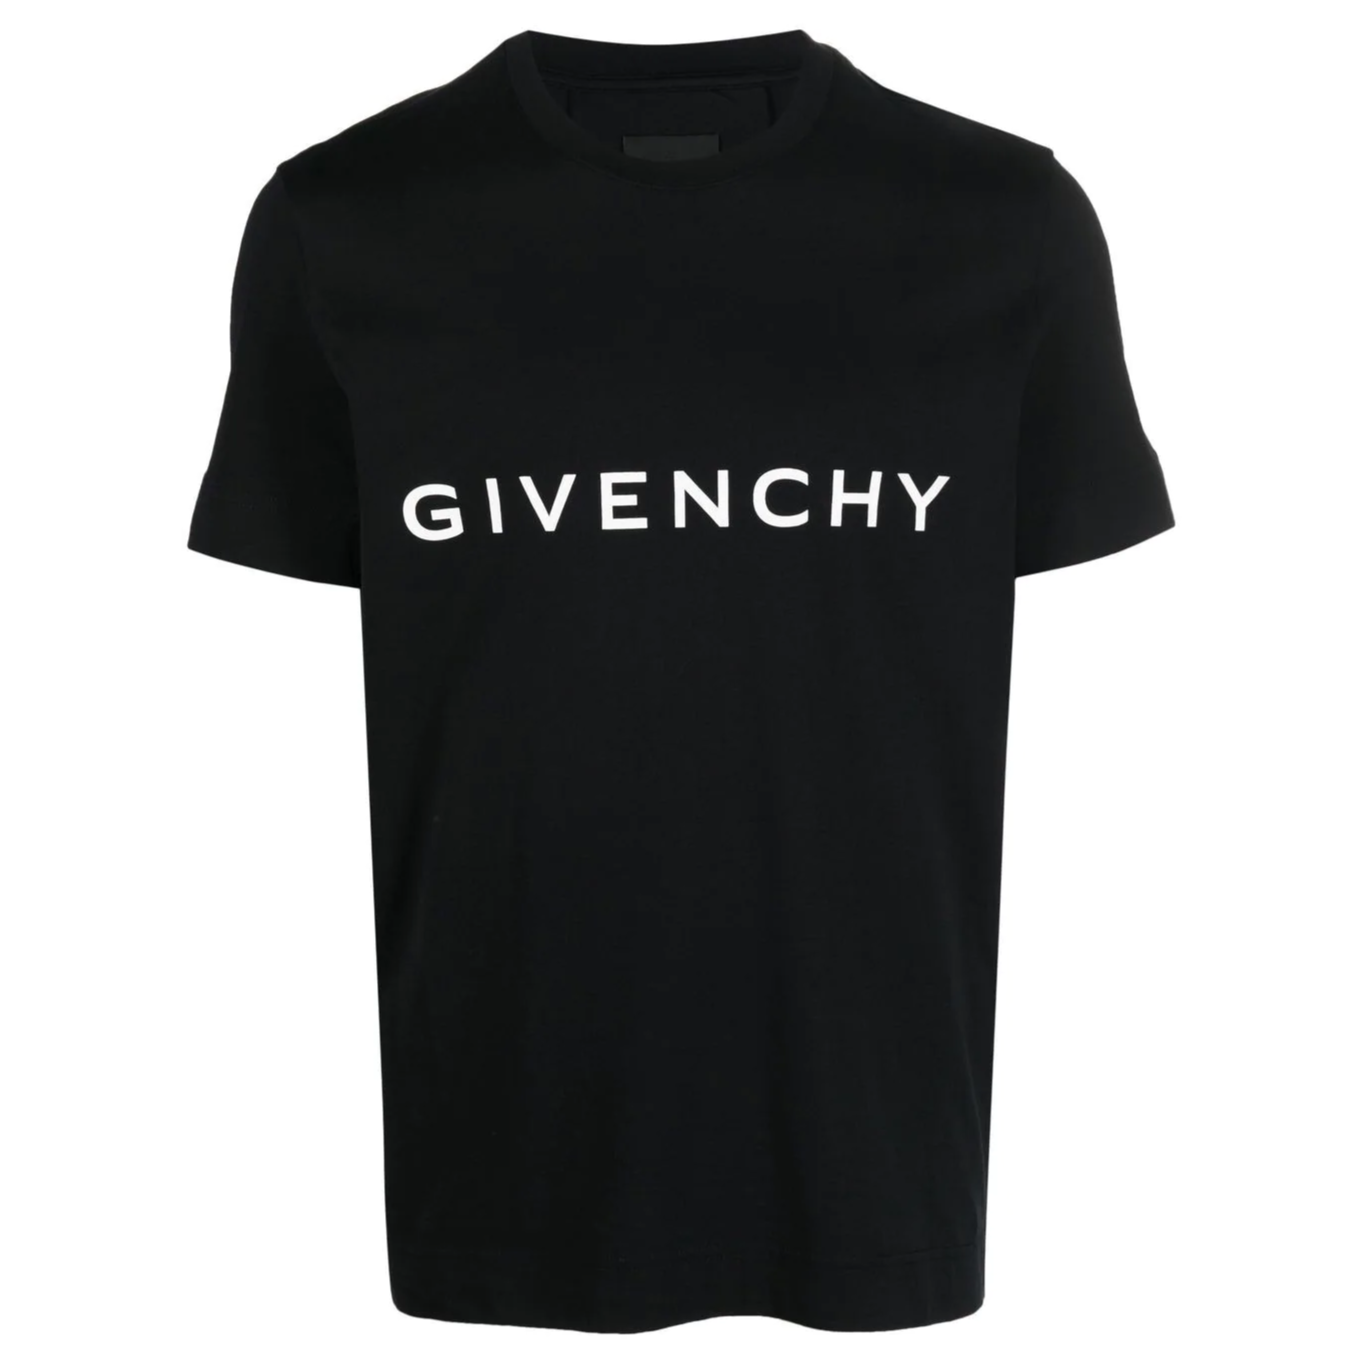 Total 77+ imagen how much is givenchy t shirt